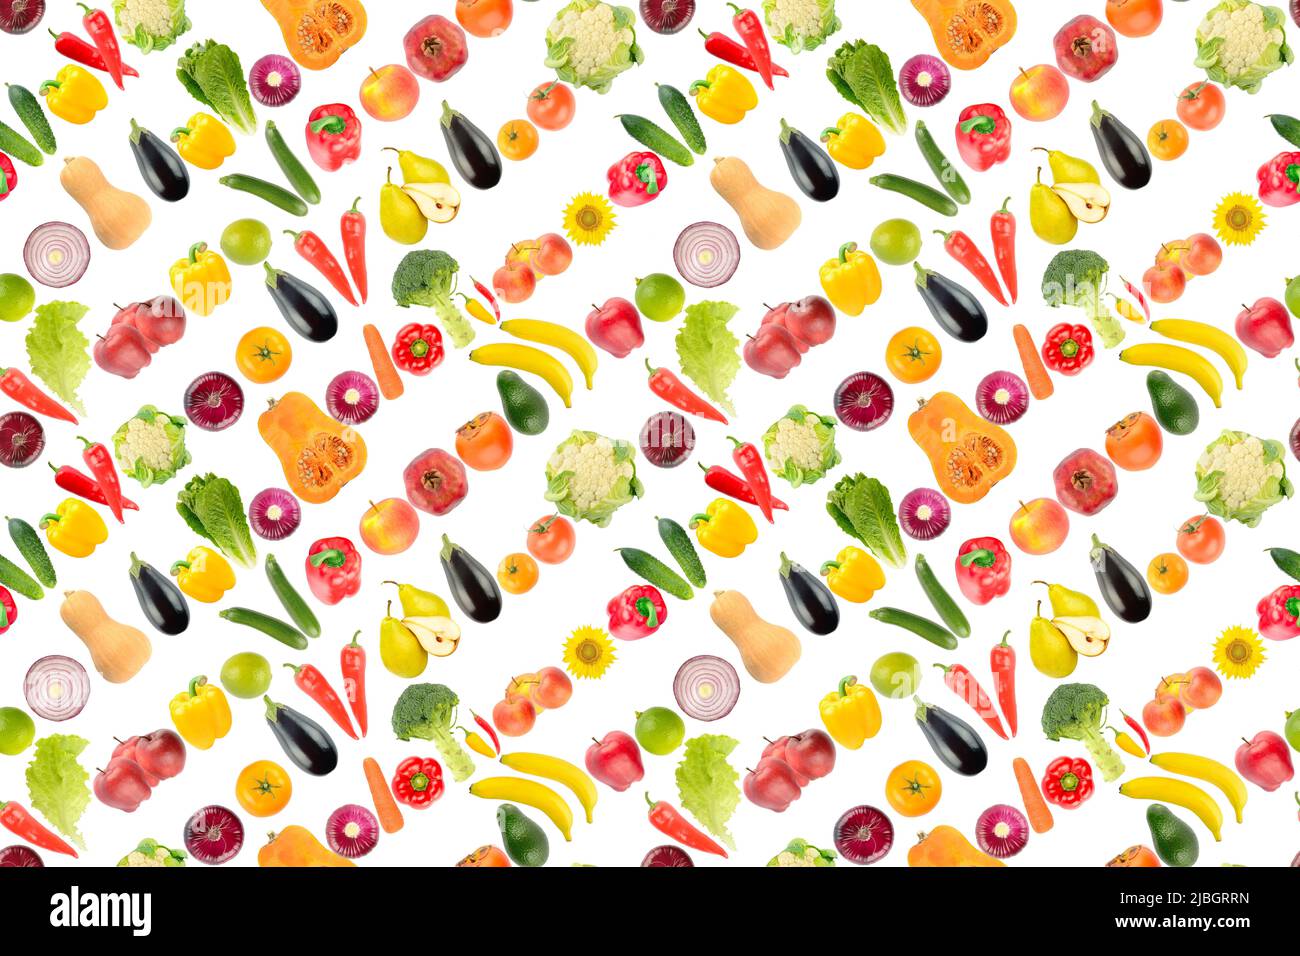 Large seamless texture of vegetables, fruits and berries isolated on white background. Stock Photo